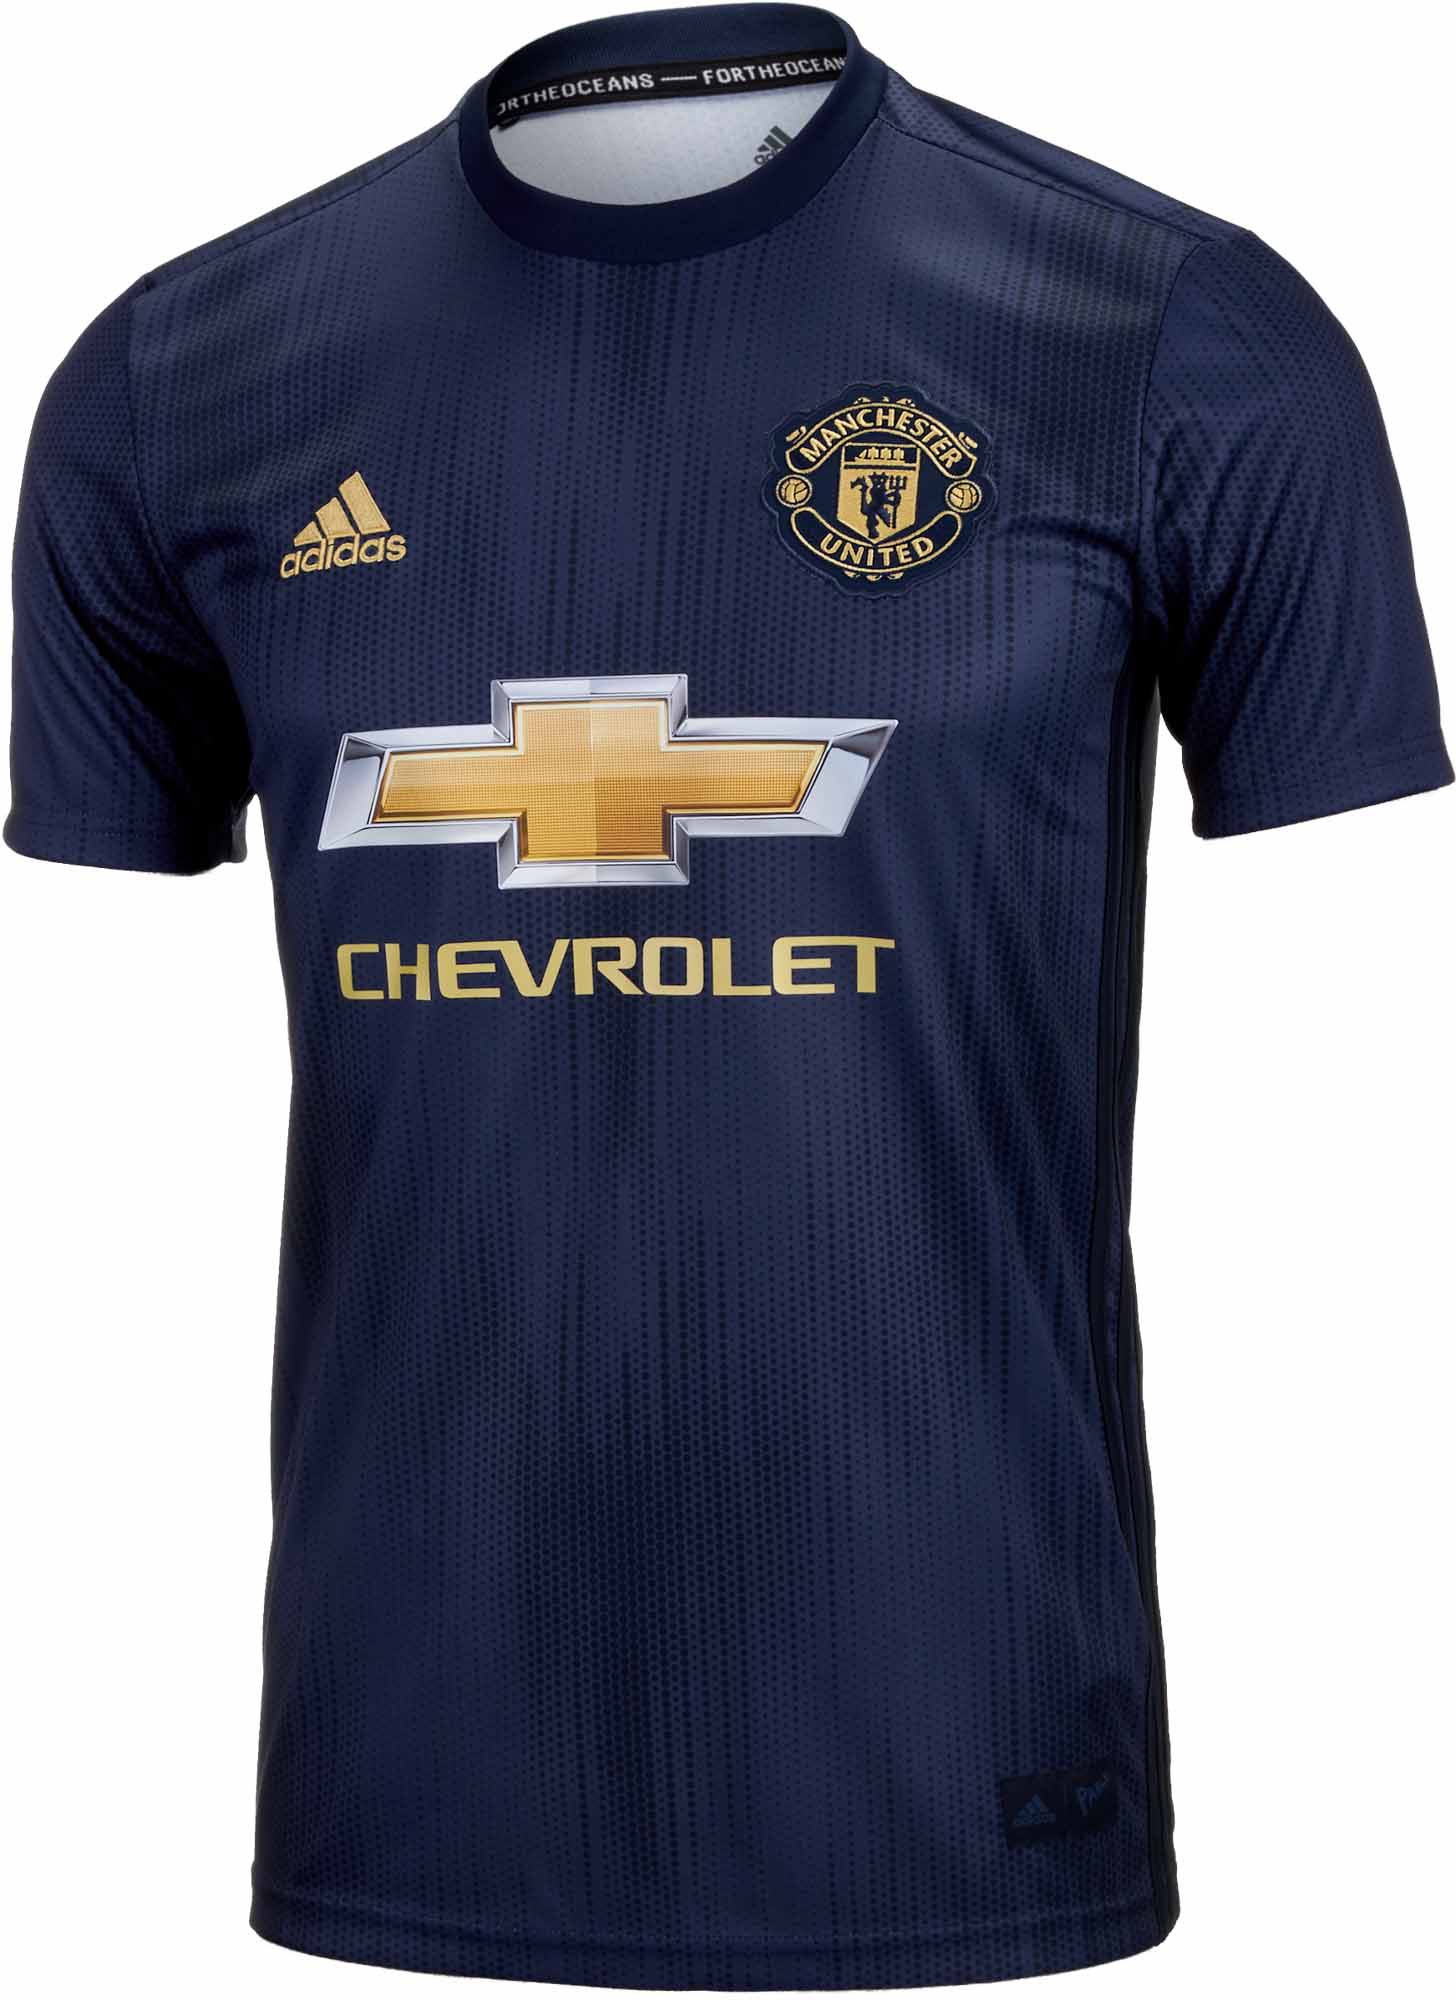 manchester united navy jersey